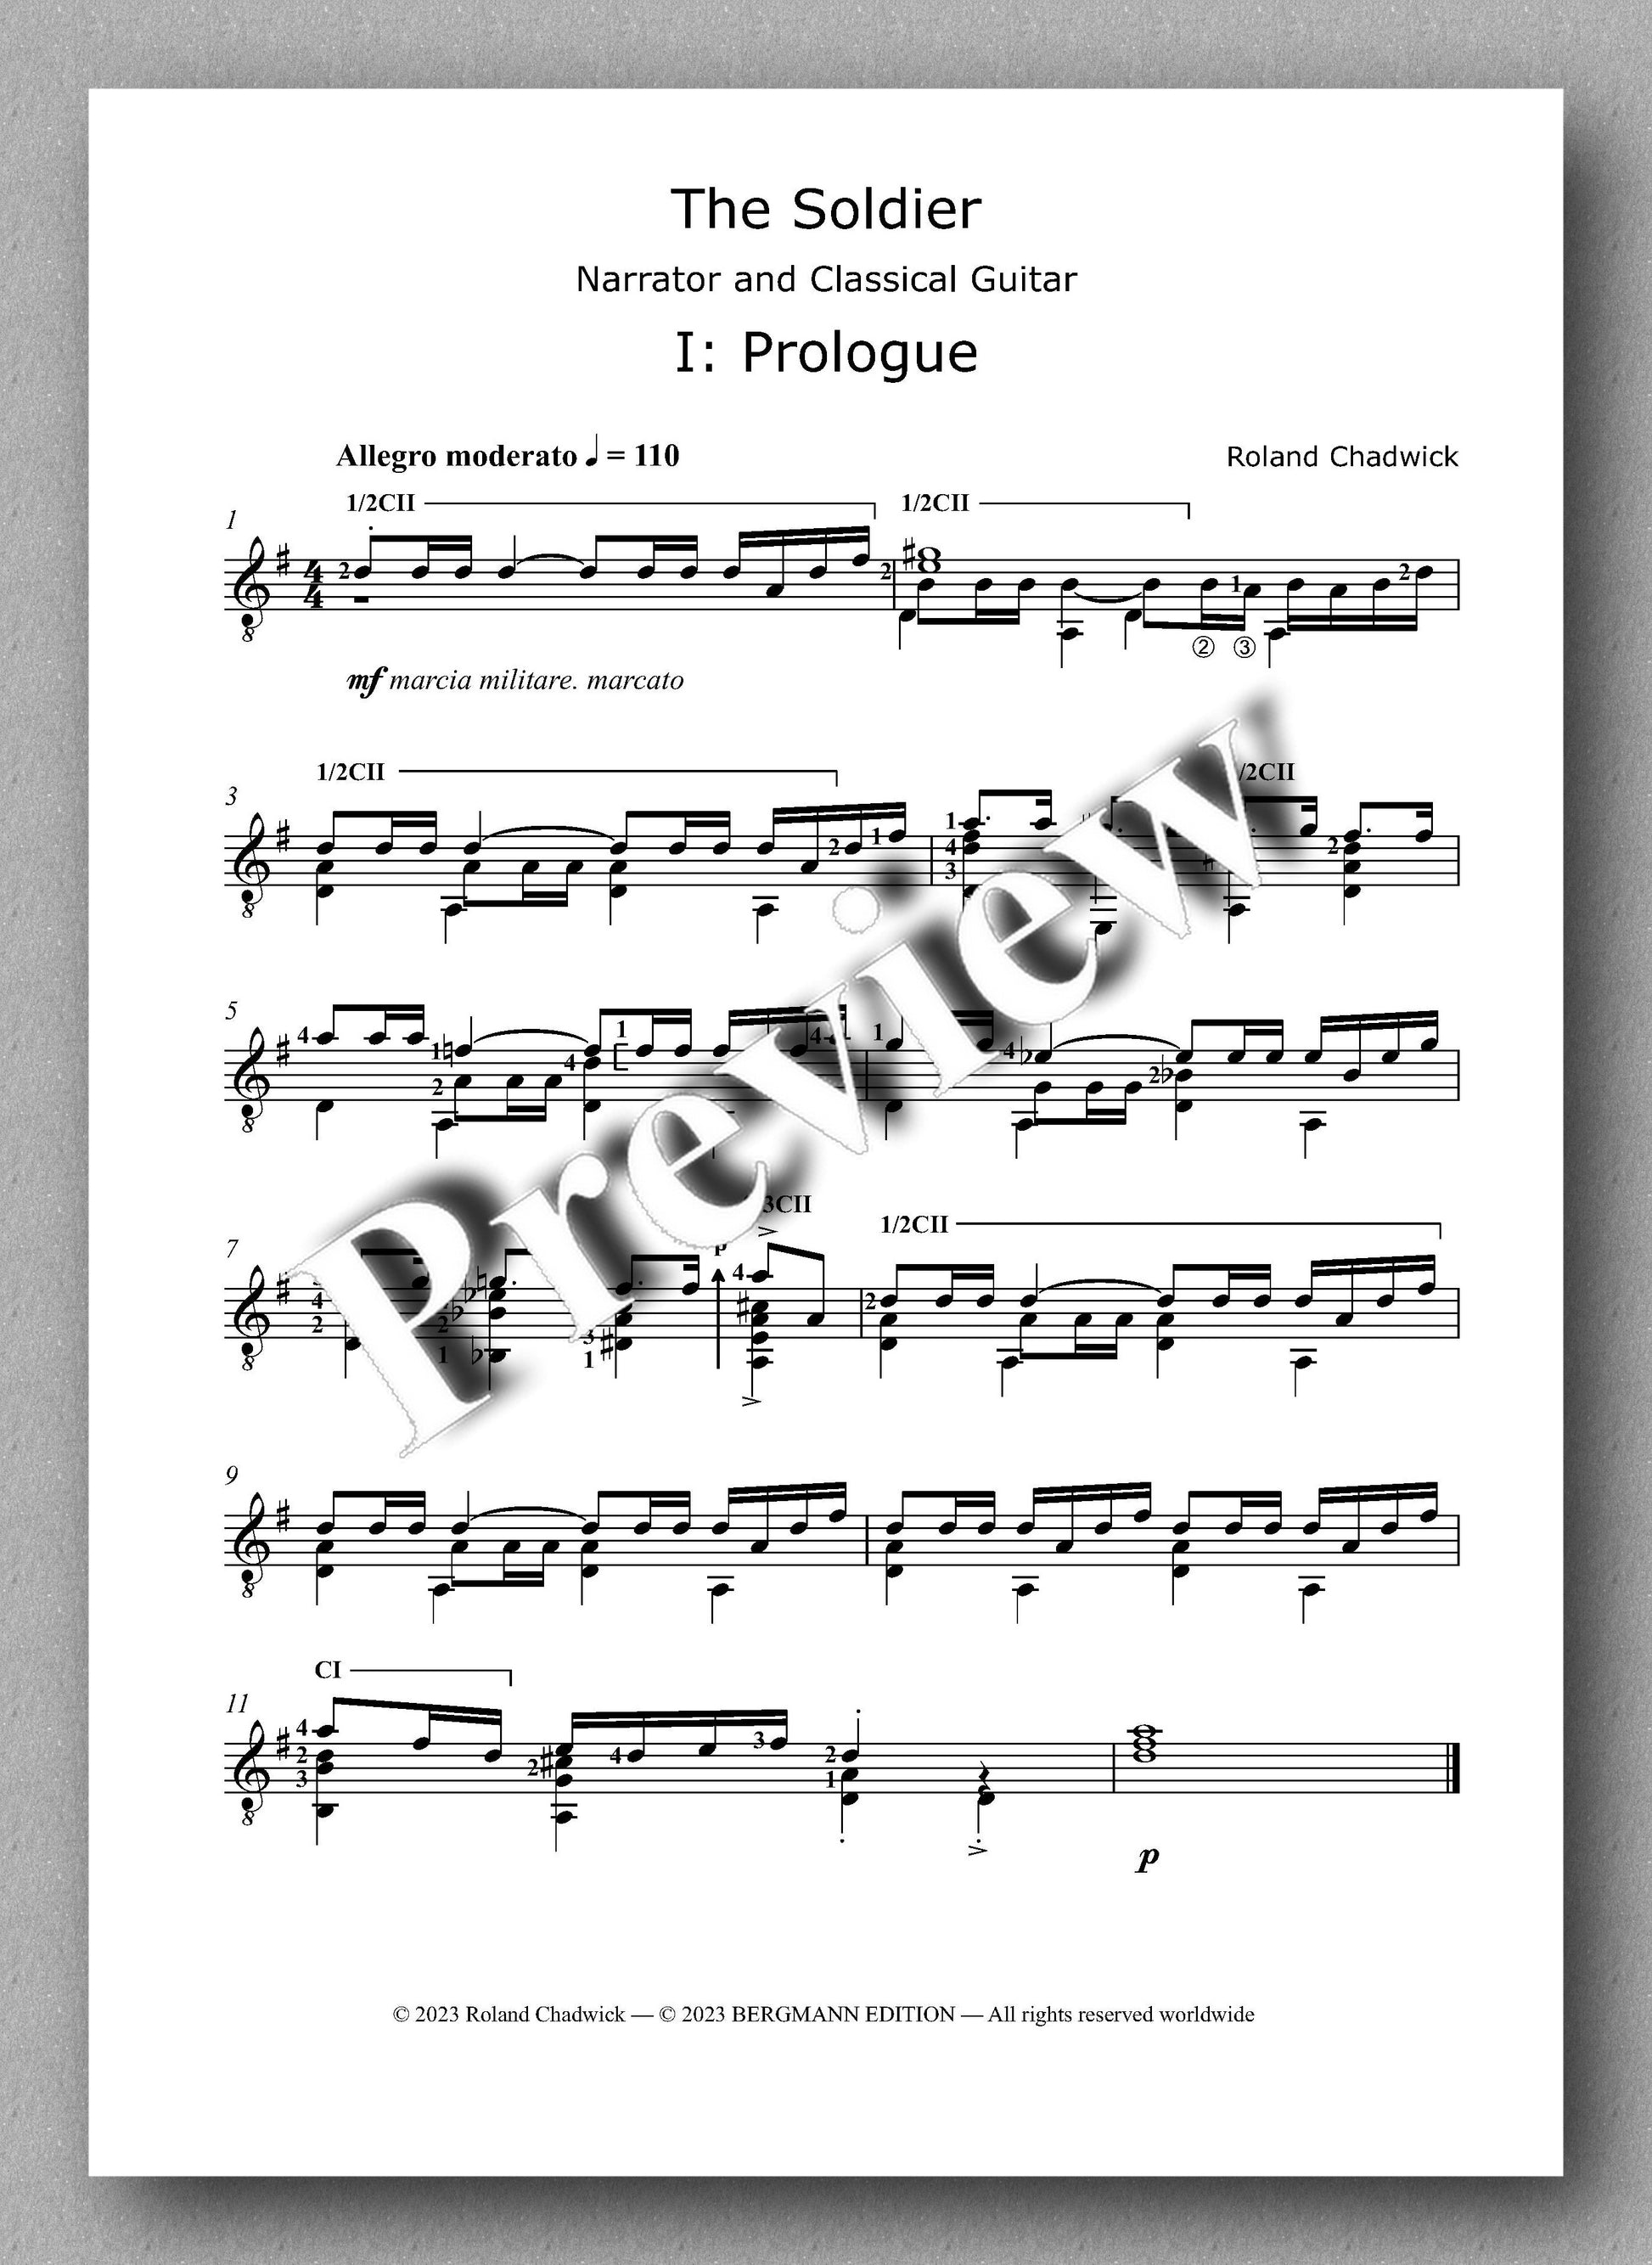 Roland Chadwick - The Soldier - preview of the music score 1